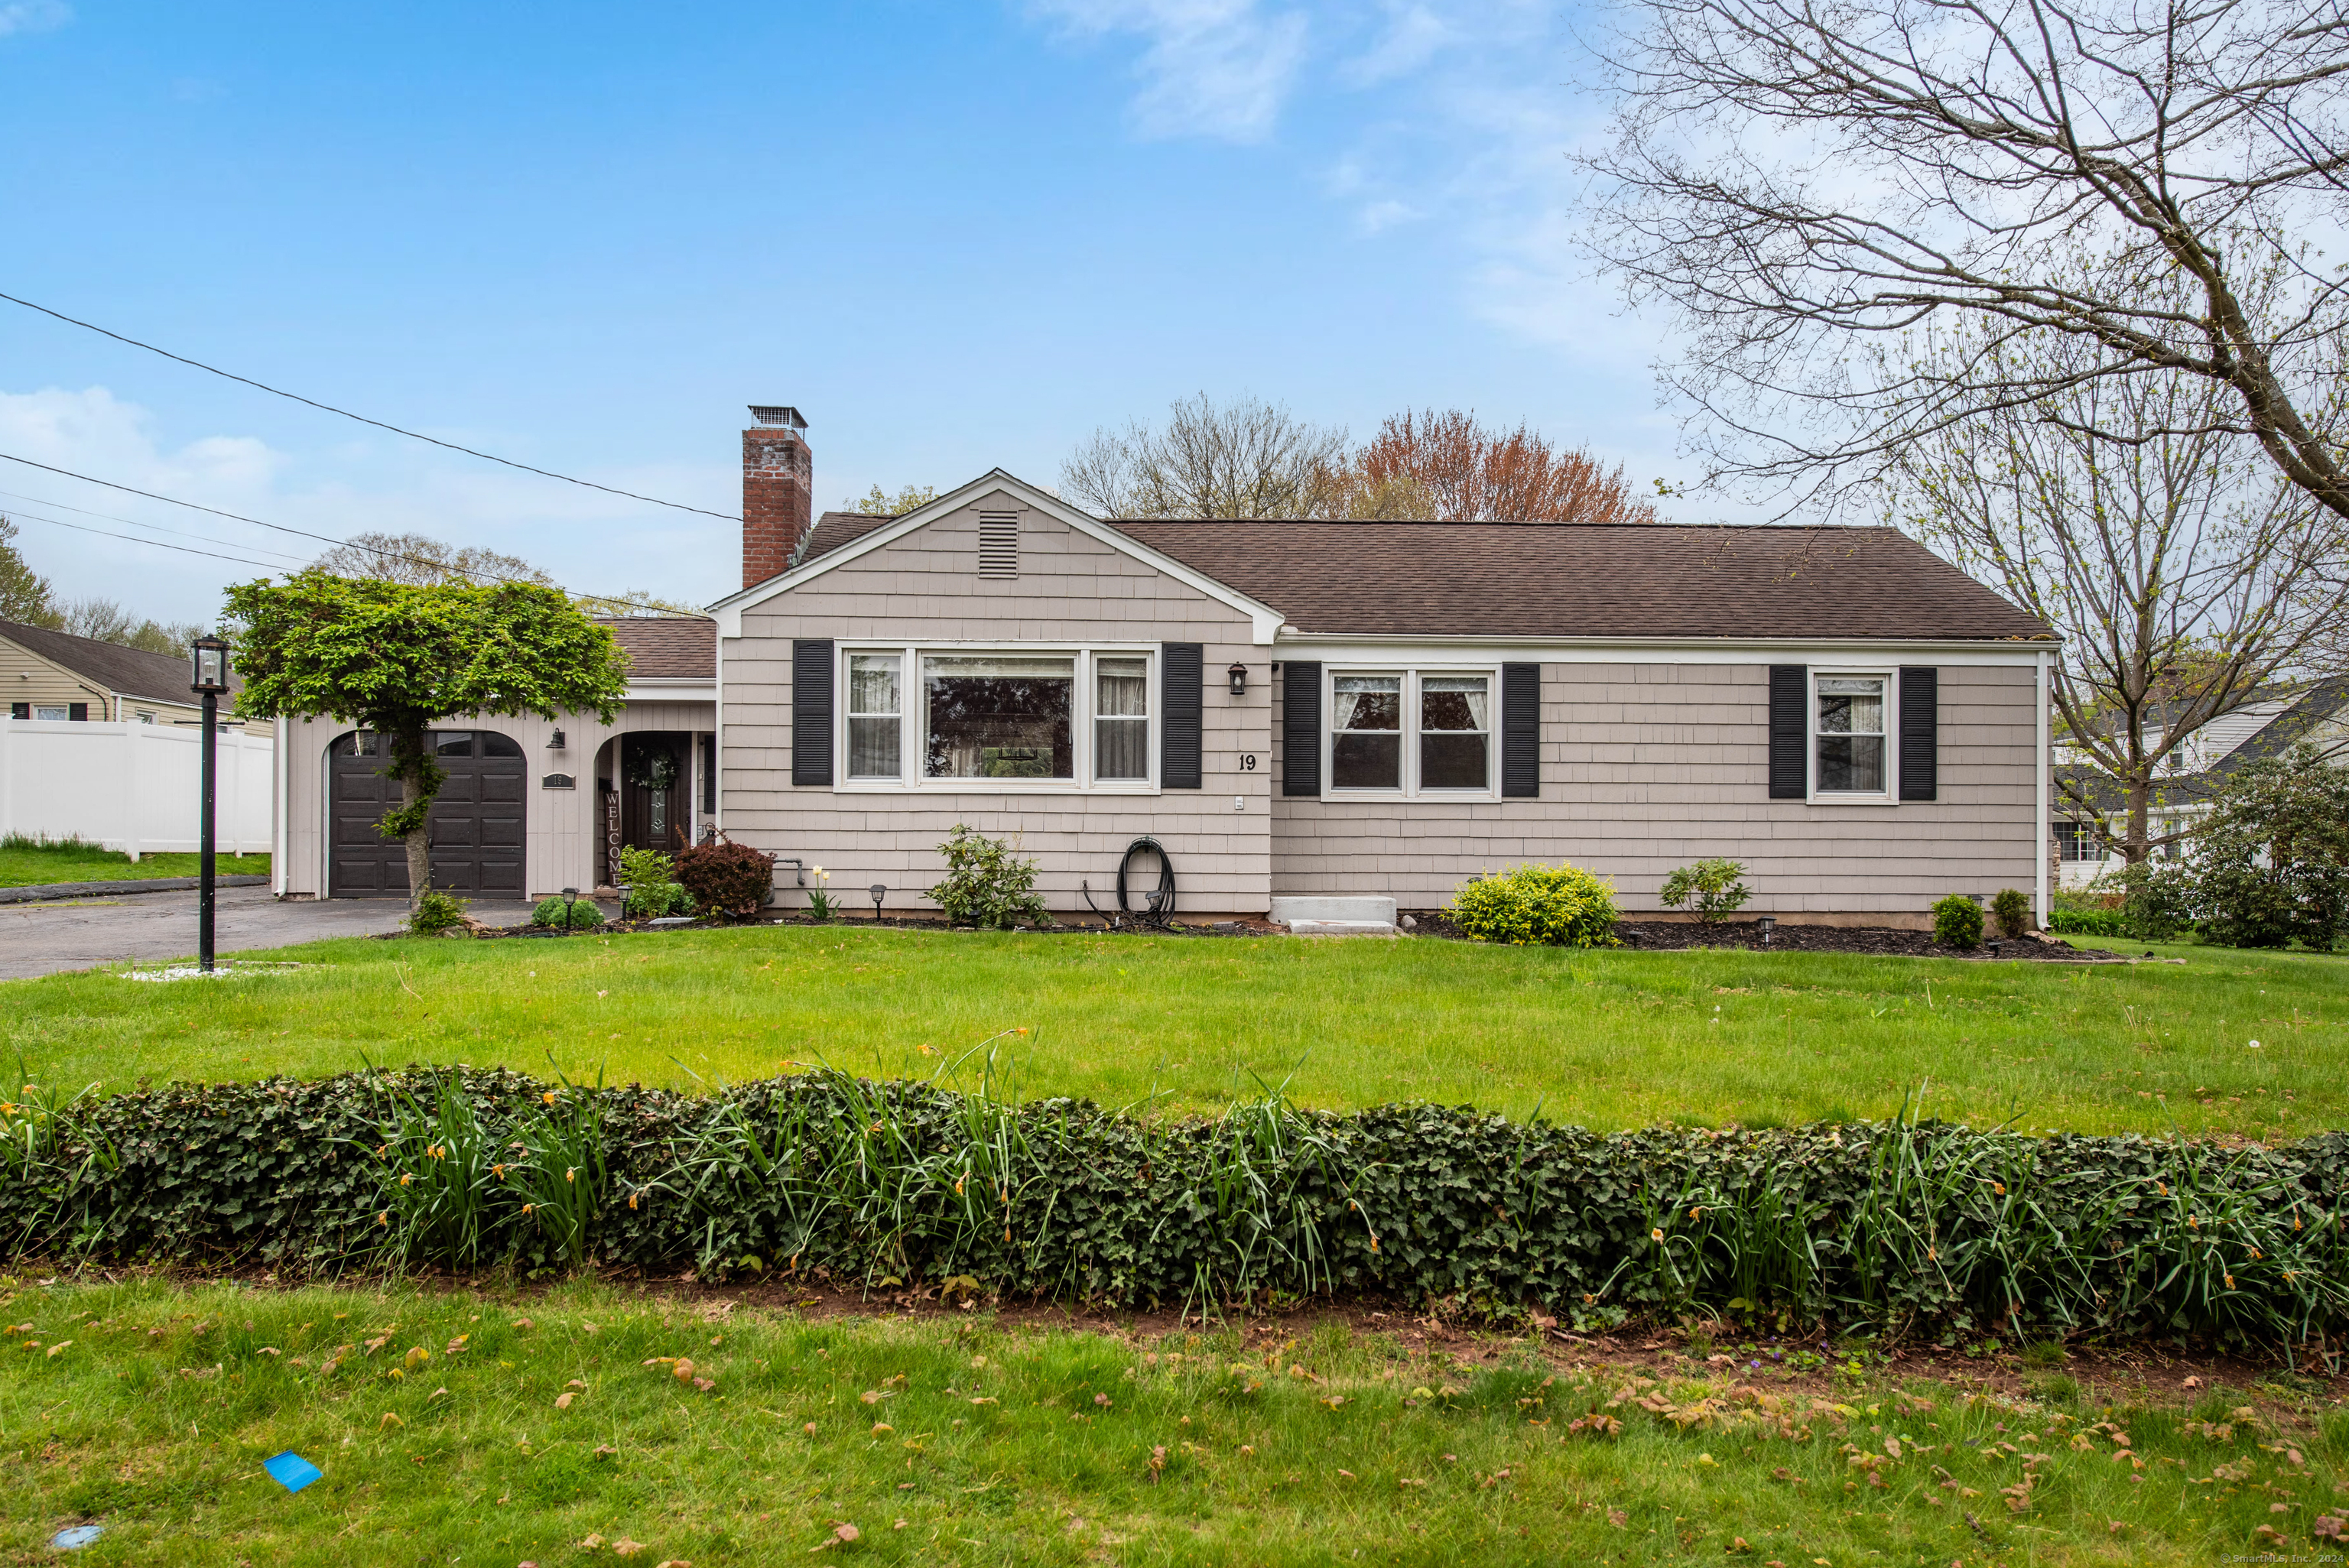 19 Griswold Road Wethersfield CT